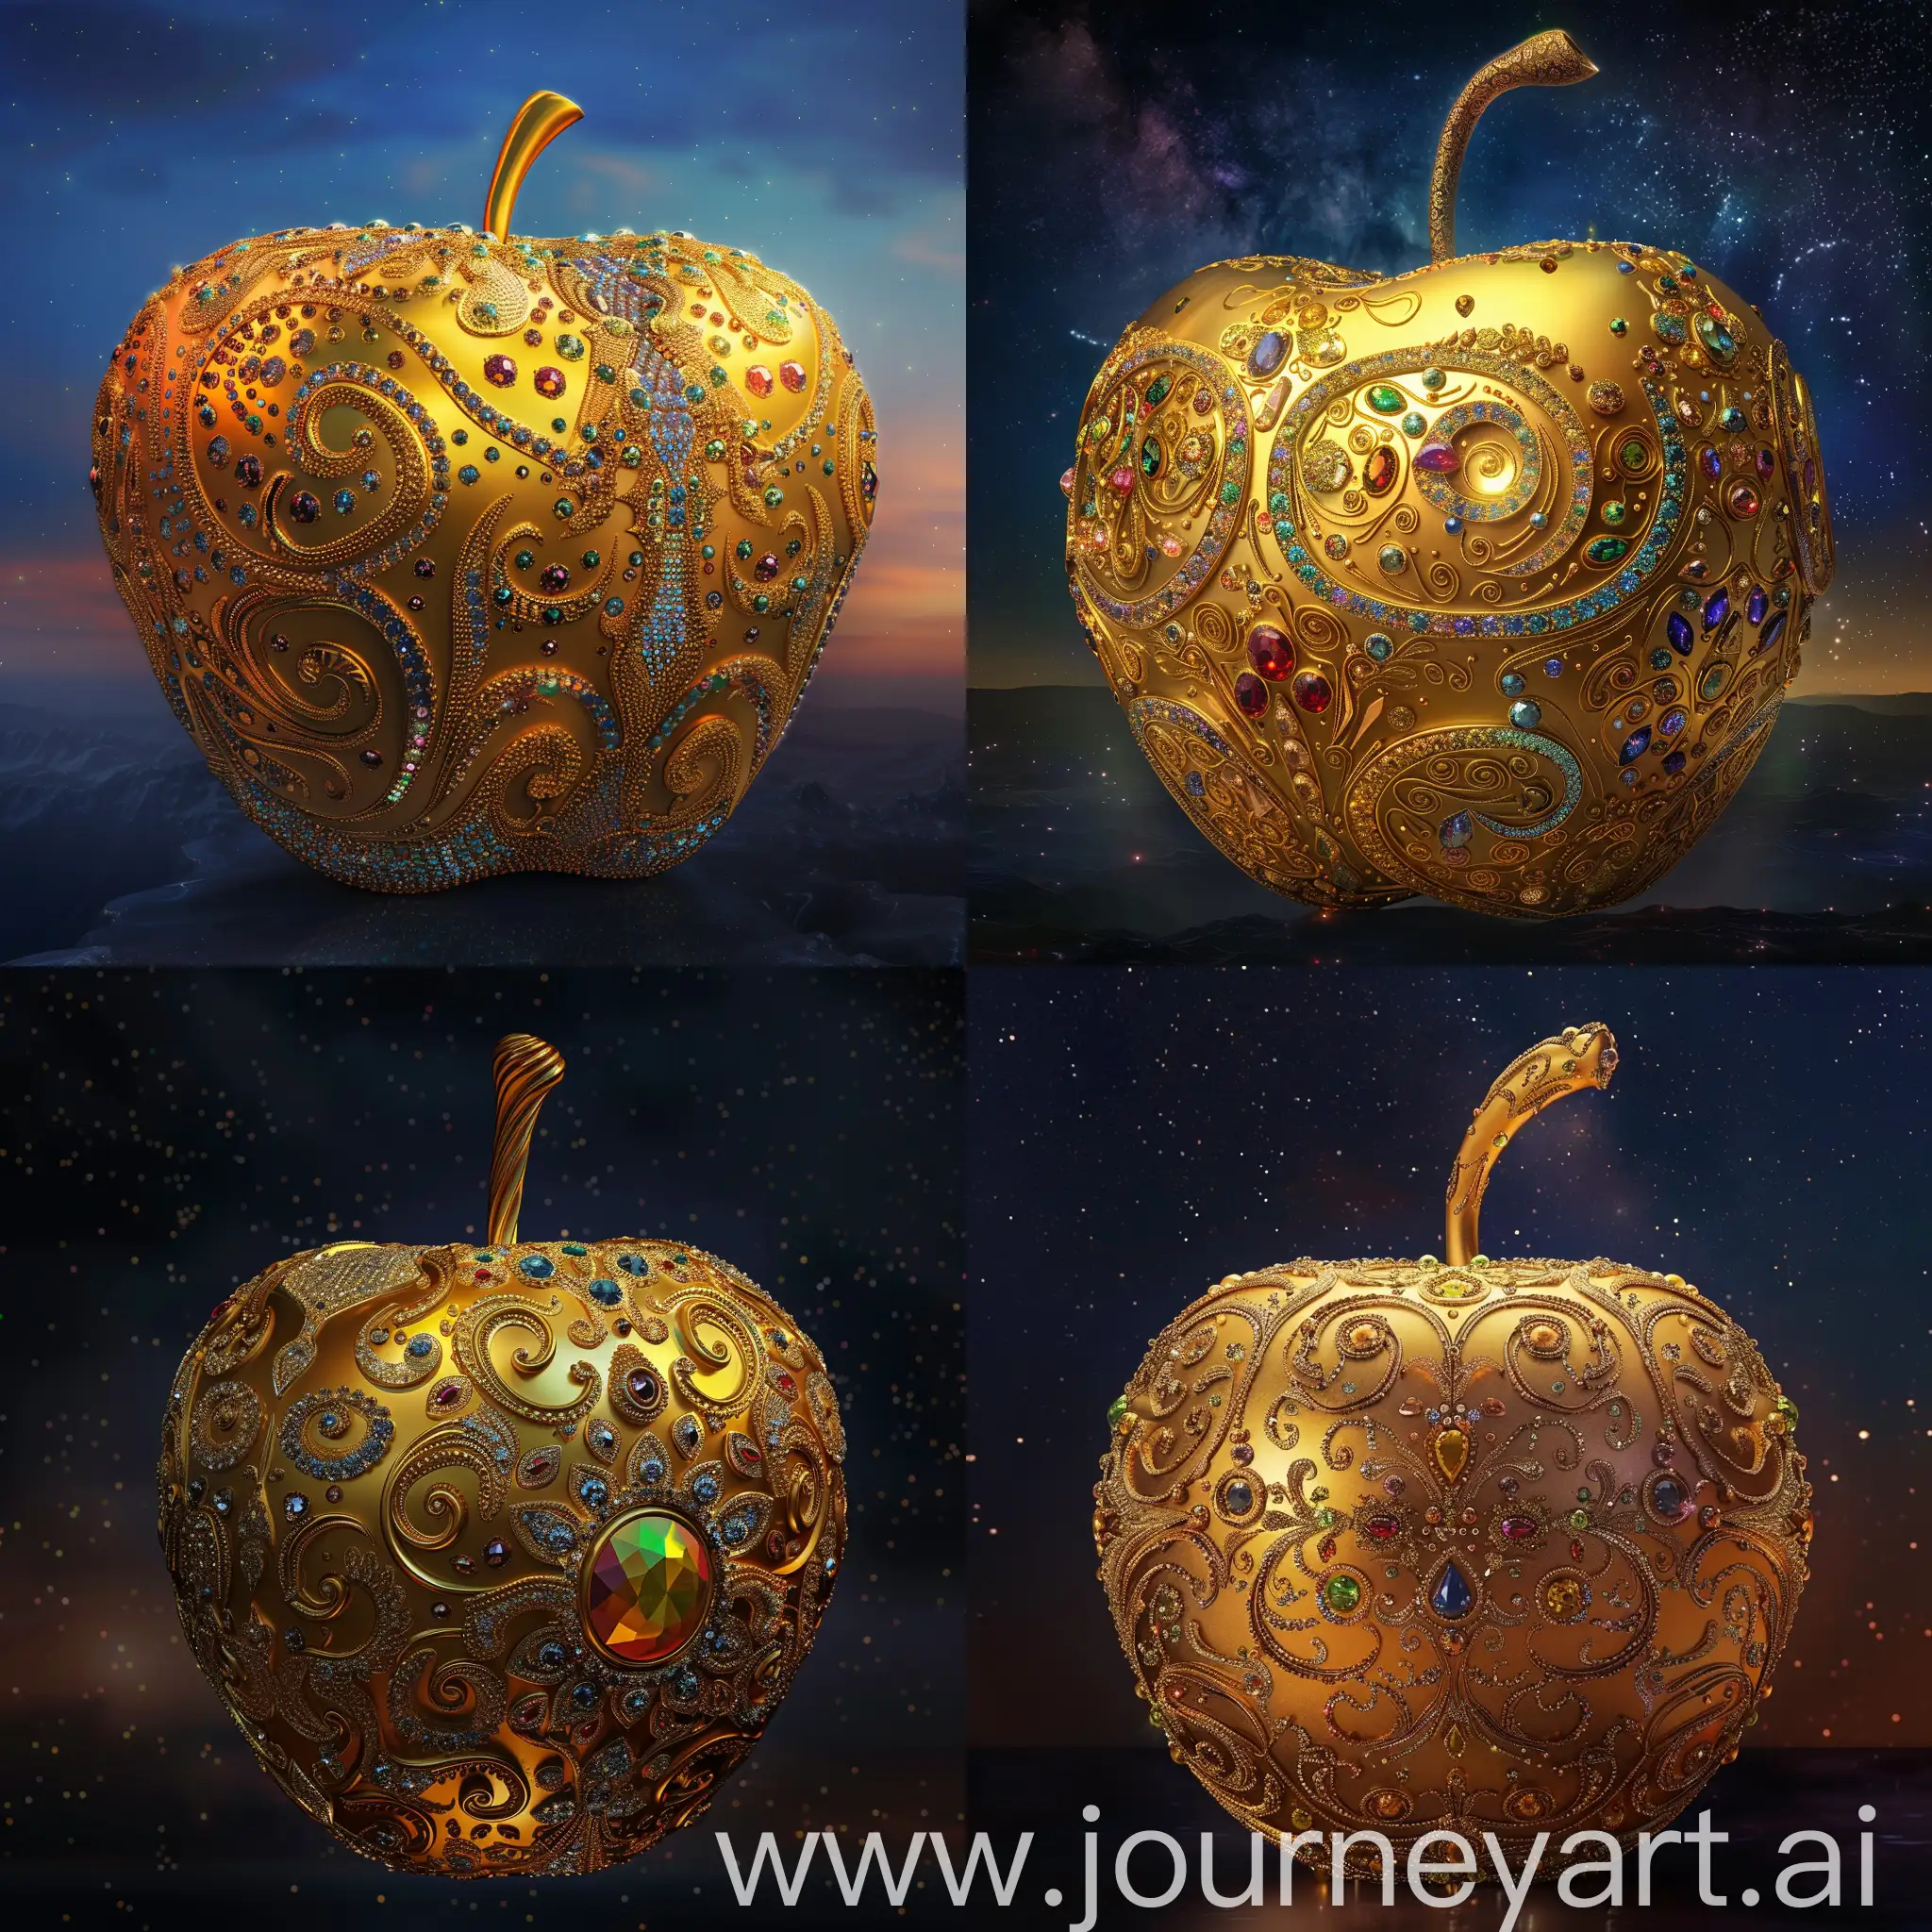 Magical-Golden-Apple-with-Precious-Stone-Patterns-on-Night-Sky-Background